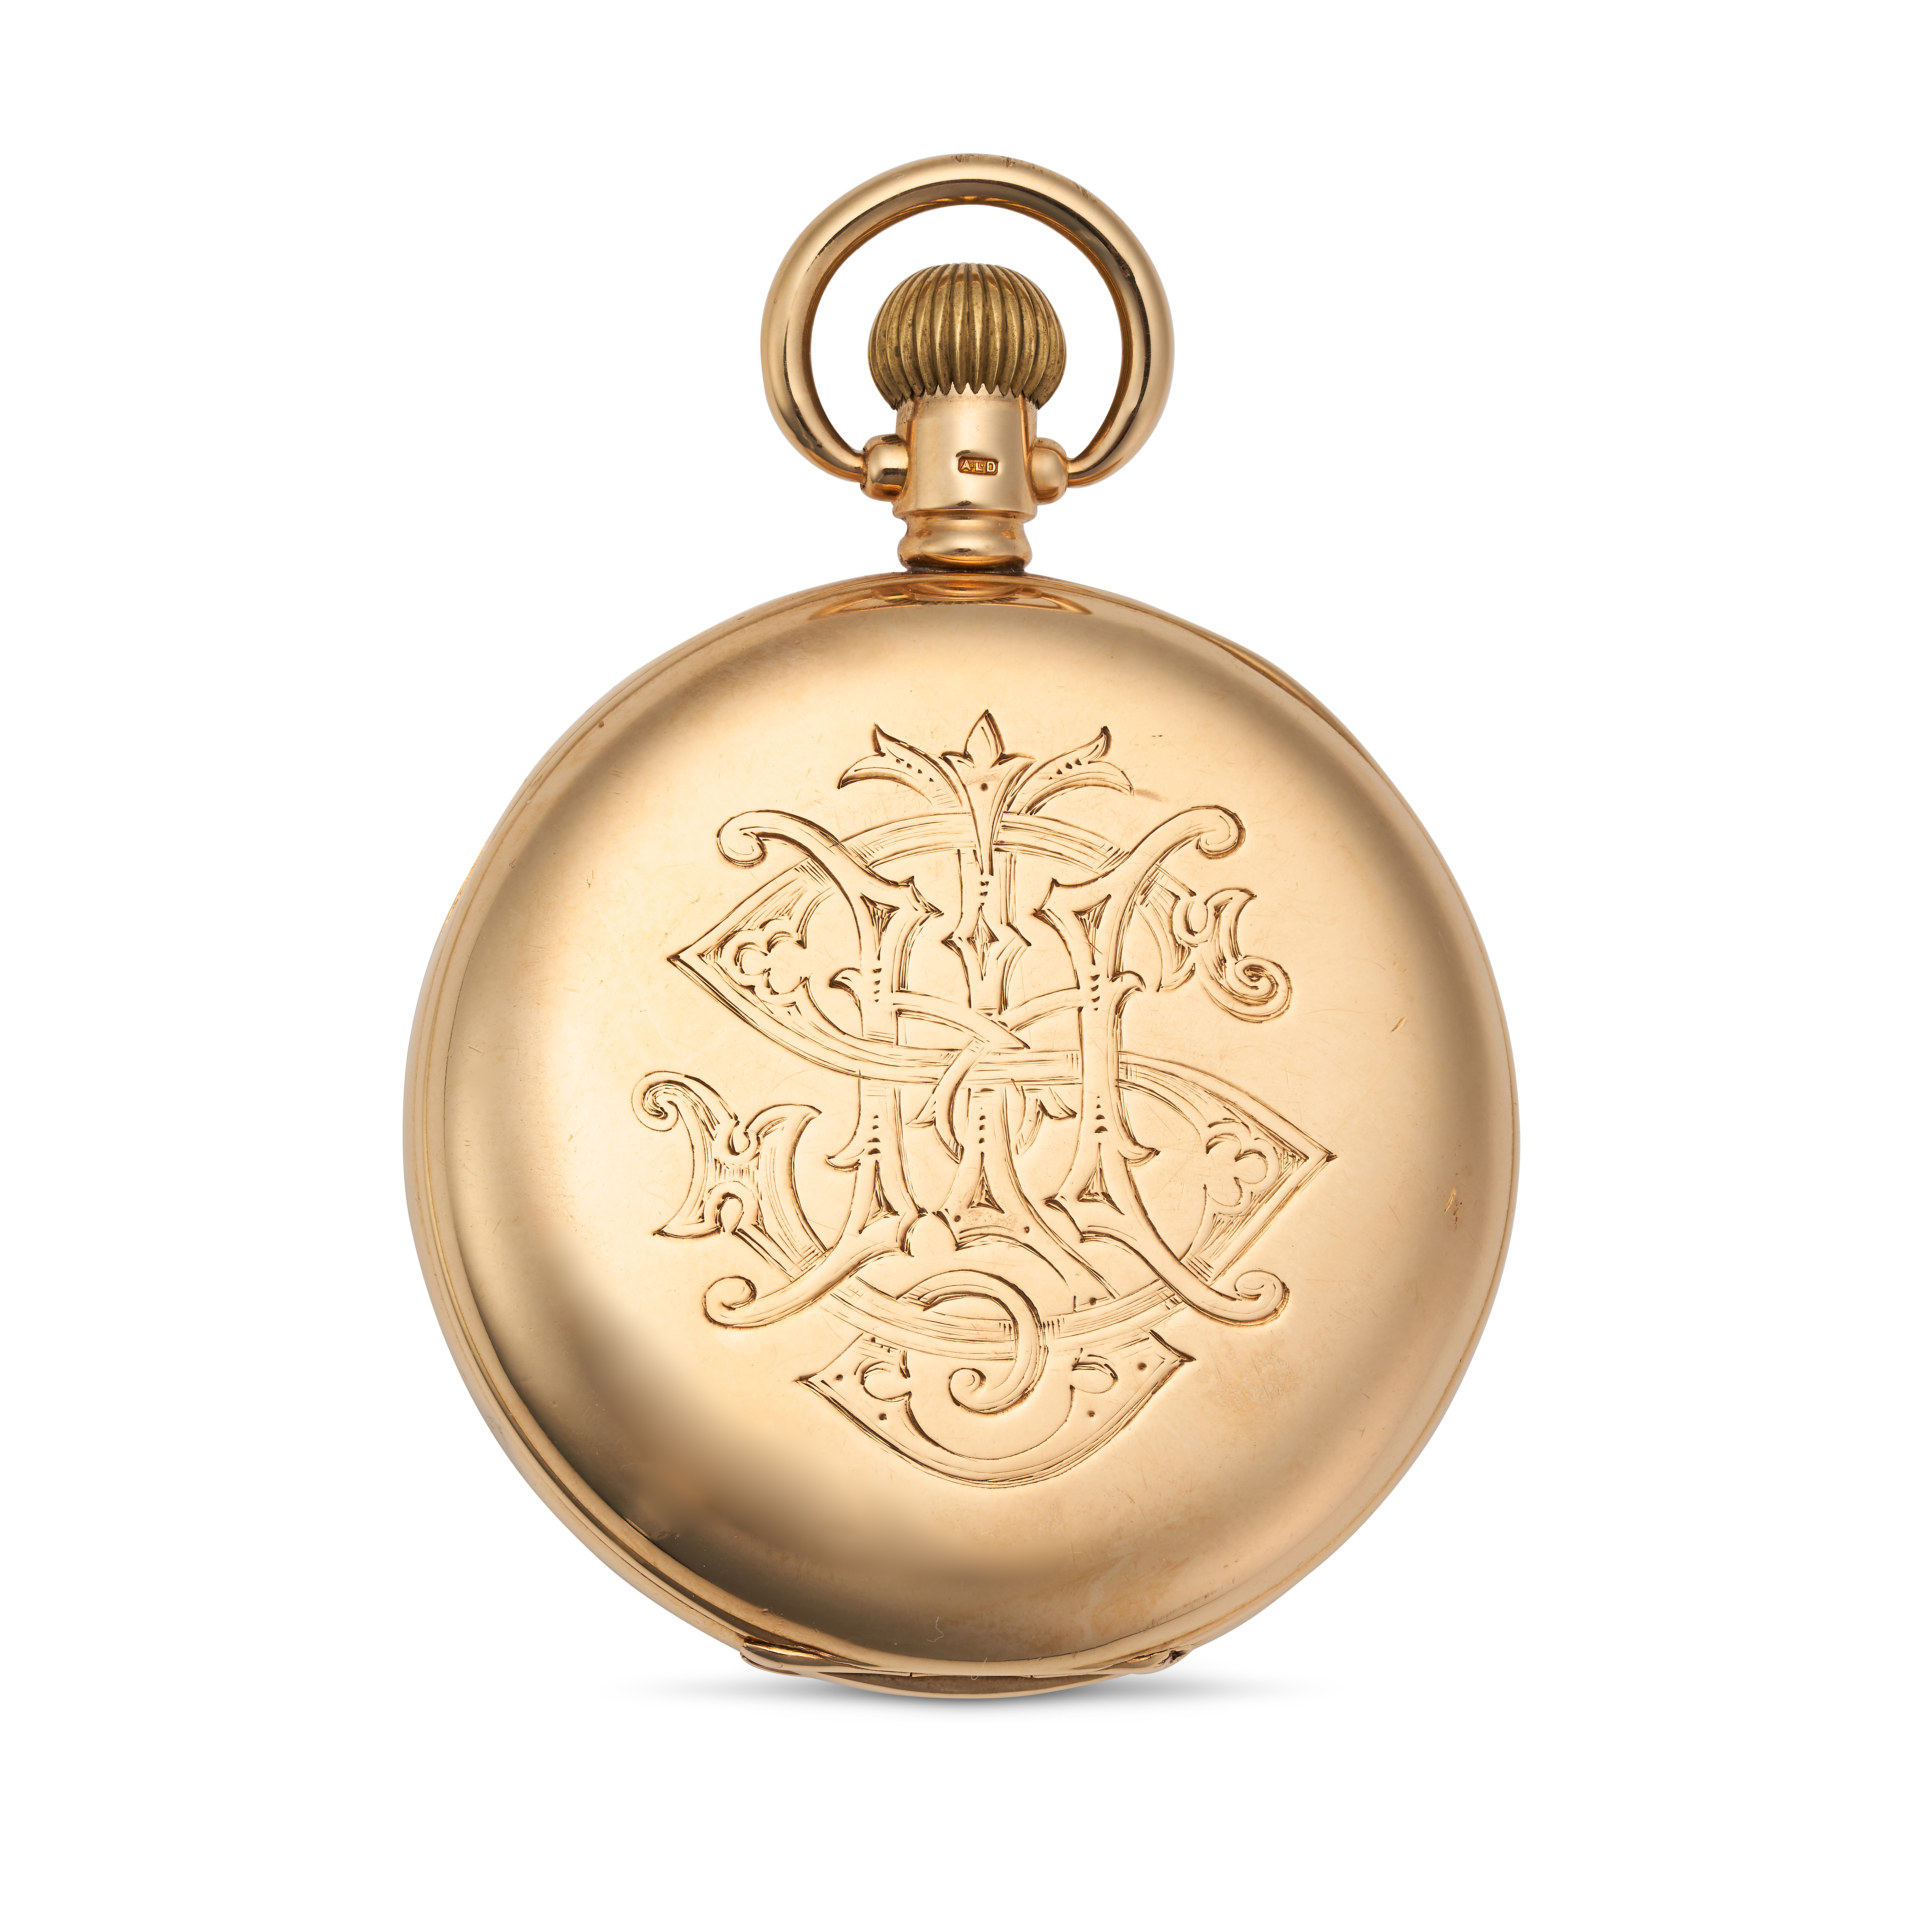 J.J. DURRANT & SON, AN ANTIQUE POCKETWATCH in 18ct yellow gold, enamelled dial with Roman numeral... - Image 2 of 2